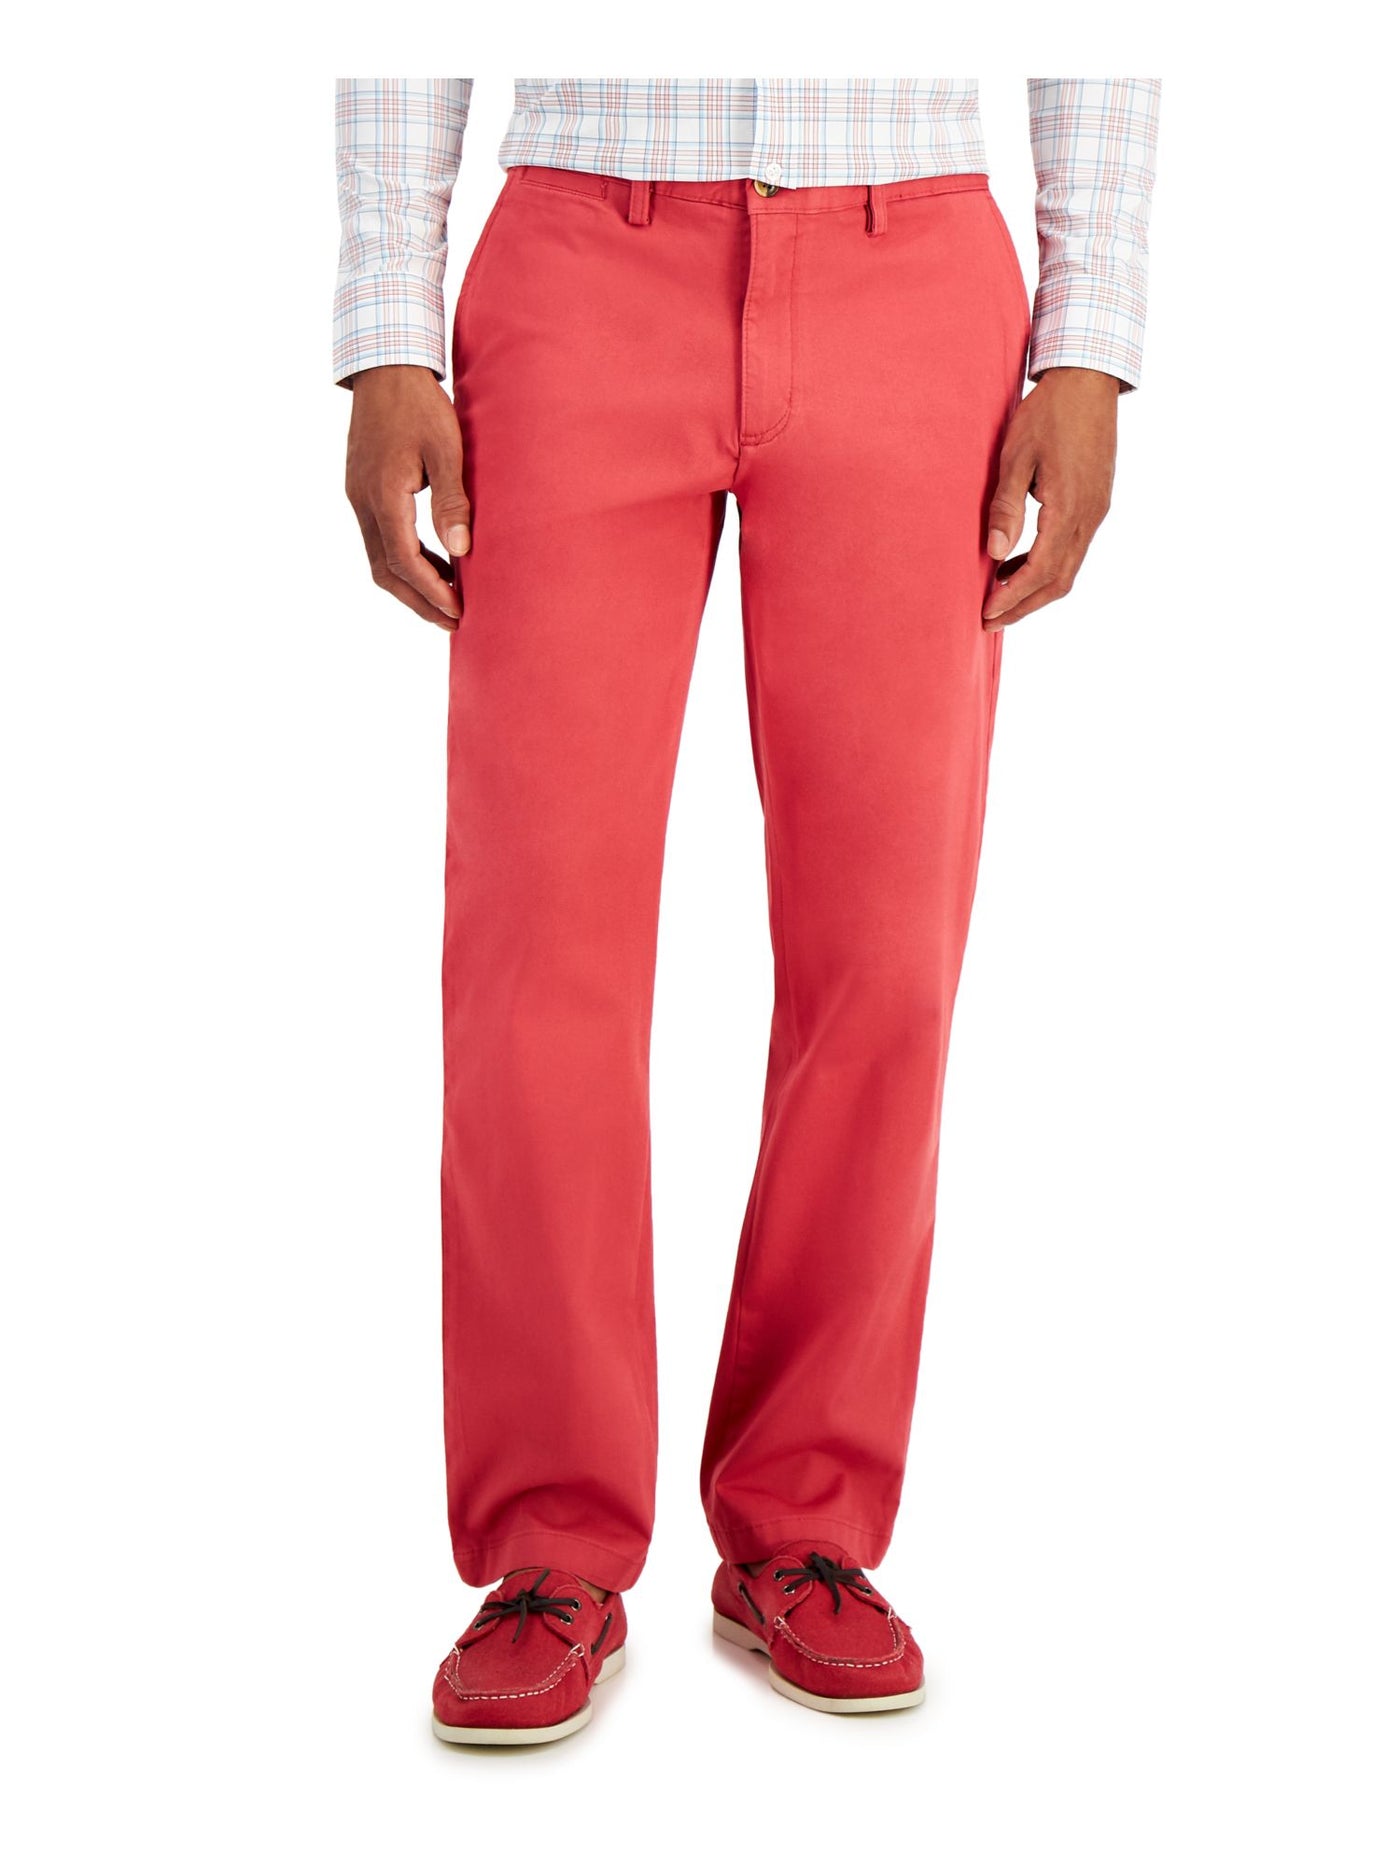 CLUBROOM Mens Red Classic Fit Stretch Chino Pants 38W/ 30L